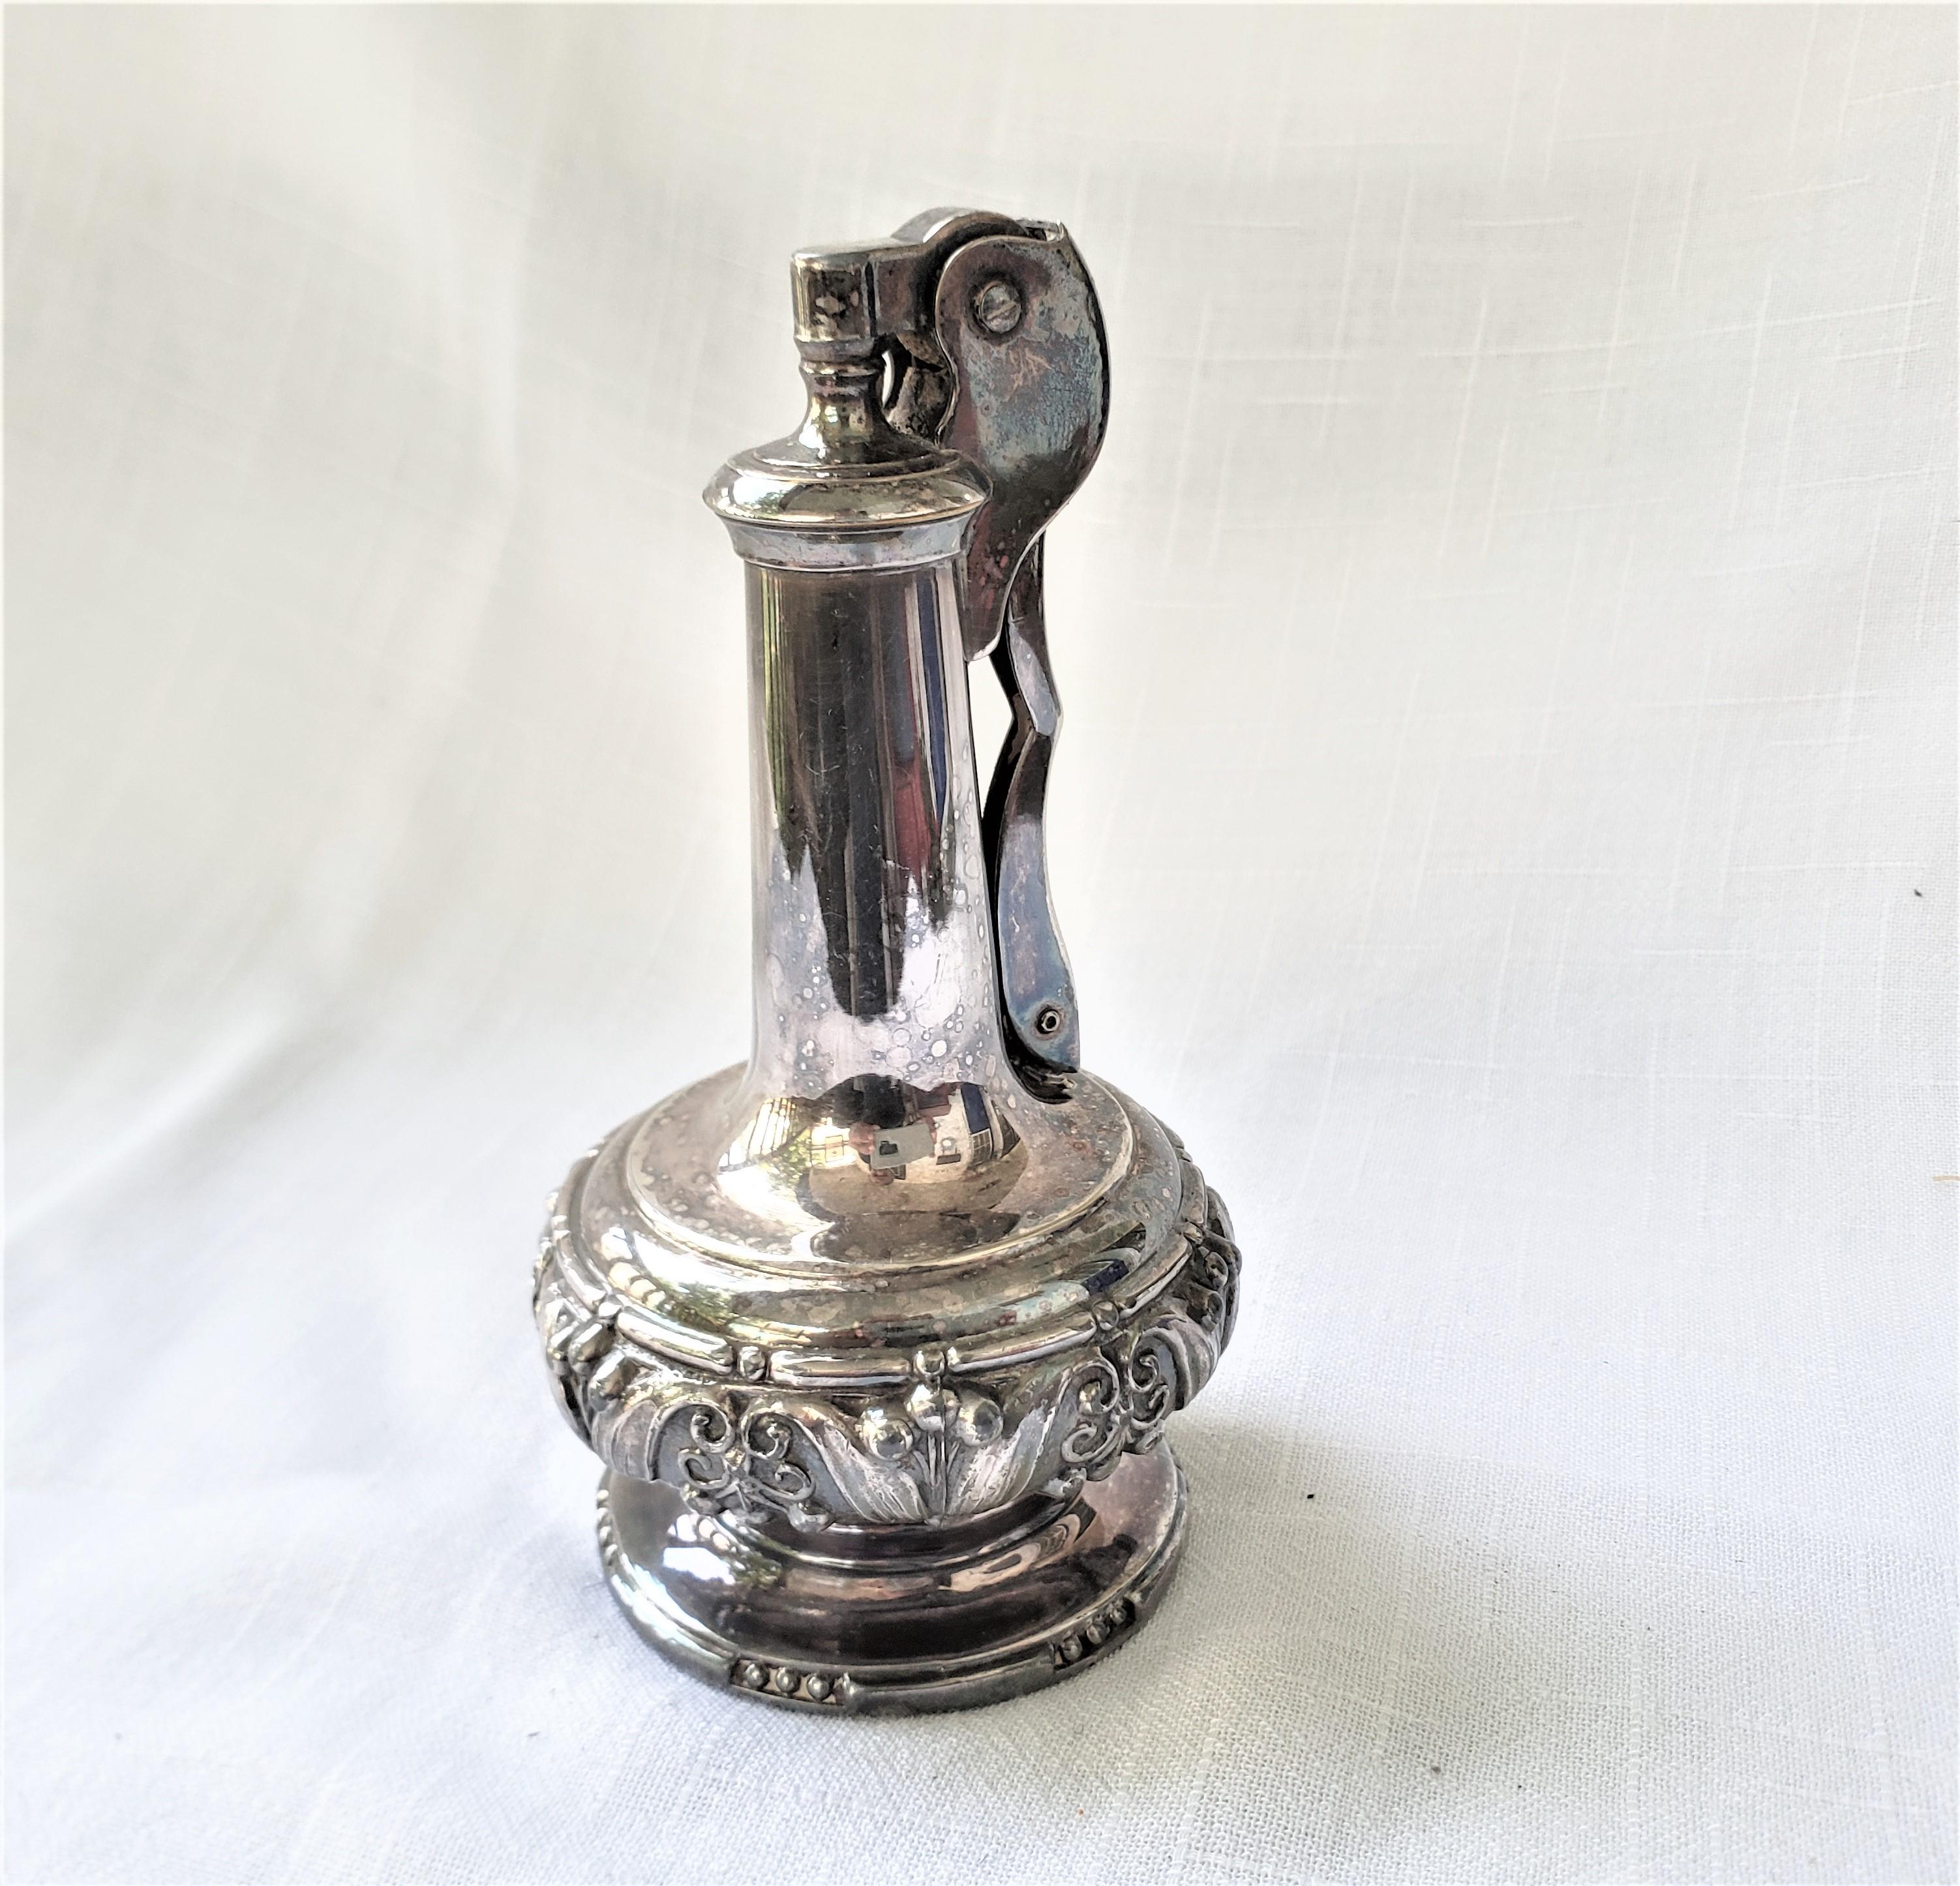 This table lighter was manufactured by Ronson of Canada and dates to approximately 1965 and done in the period Mid-Century Modern style. The lighter is composed of a cast and silver plated base with a spring loaded handle mechanism. This vintage